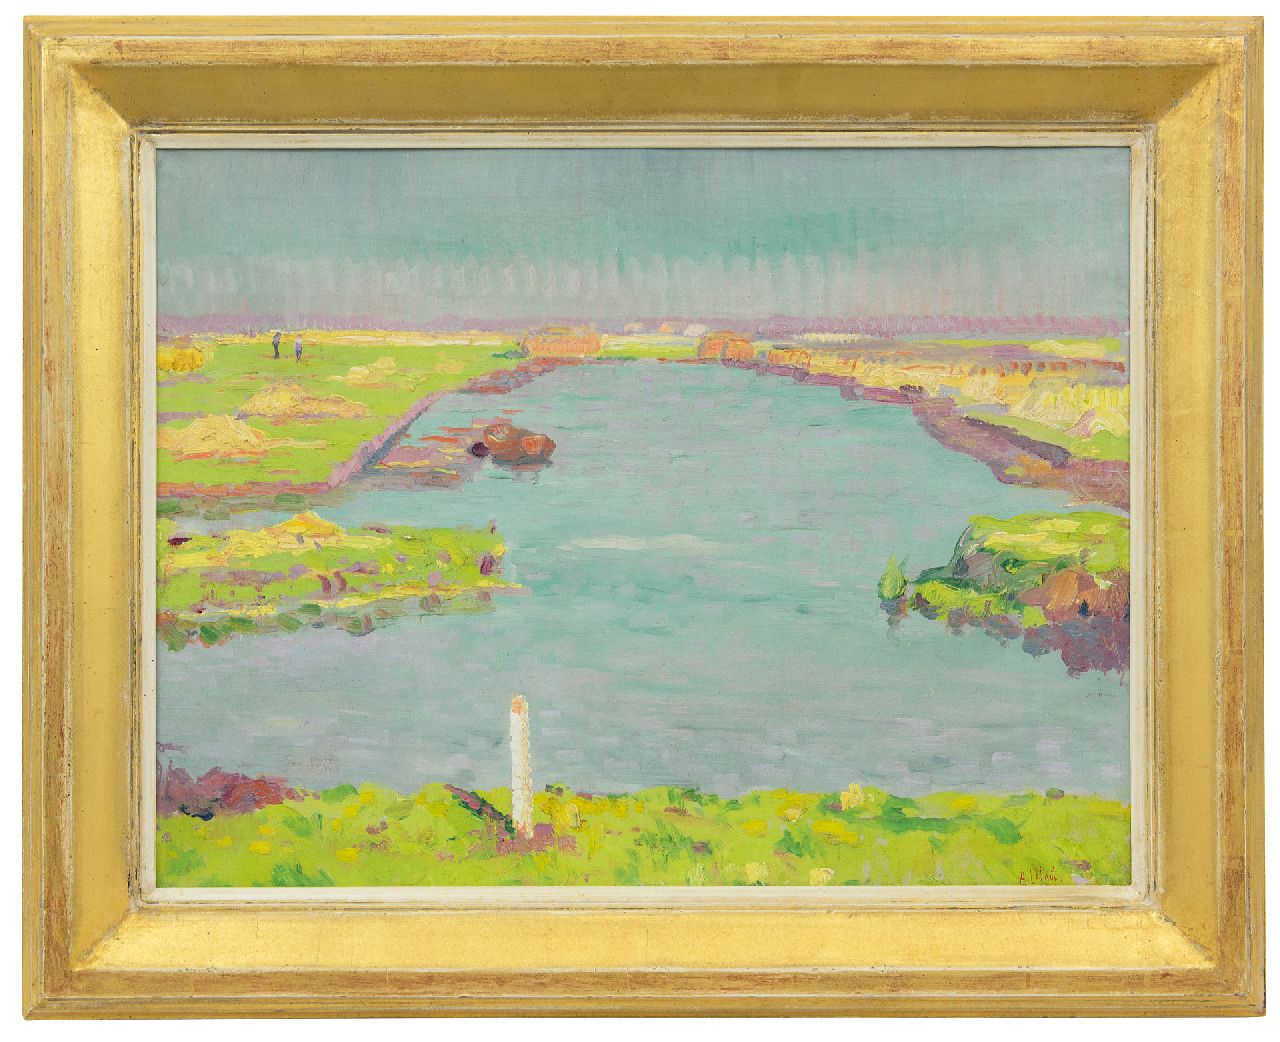 Colnot A.J.G.  | 'Arnout' Jacobus Gustaaf Colnot | Paintings offered for sale | A luministic polder landscape near Bergen, oil on canvas 49.6 x 62.9 cm, signed l.r. and painted ca. 1909